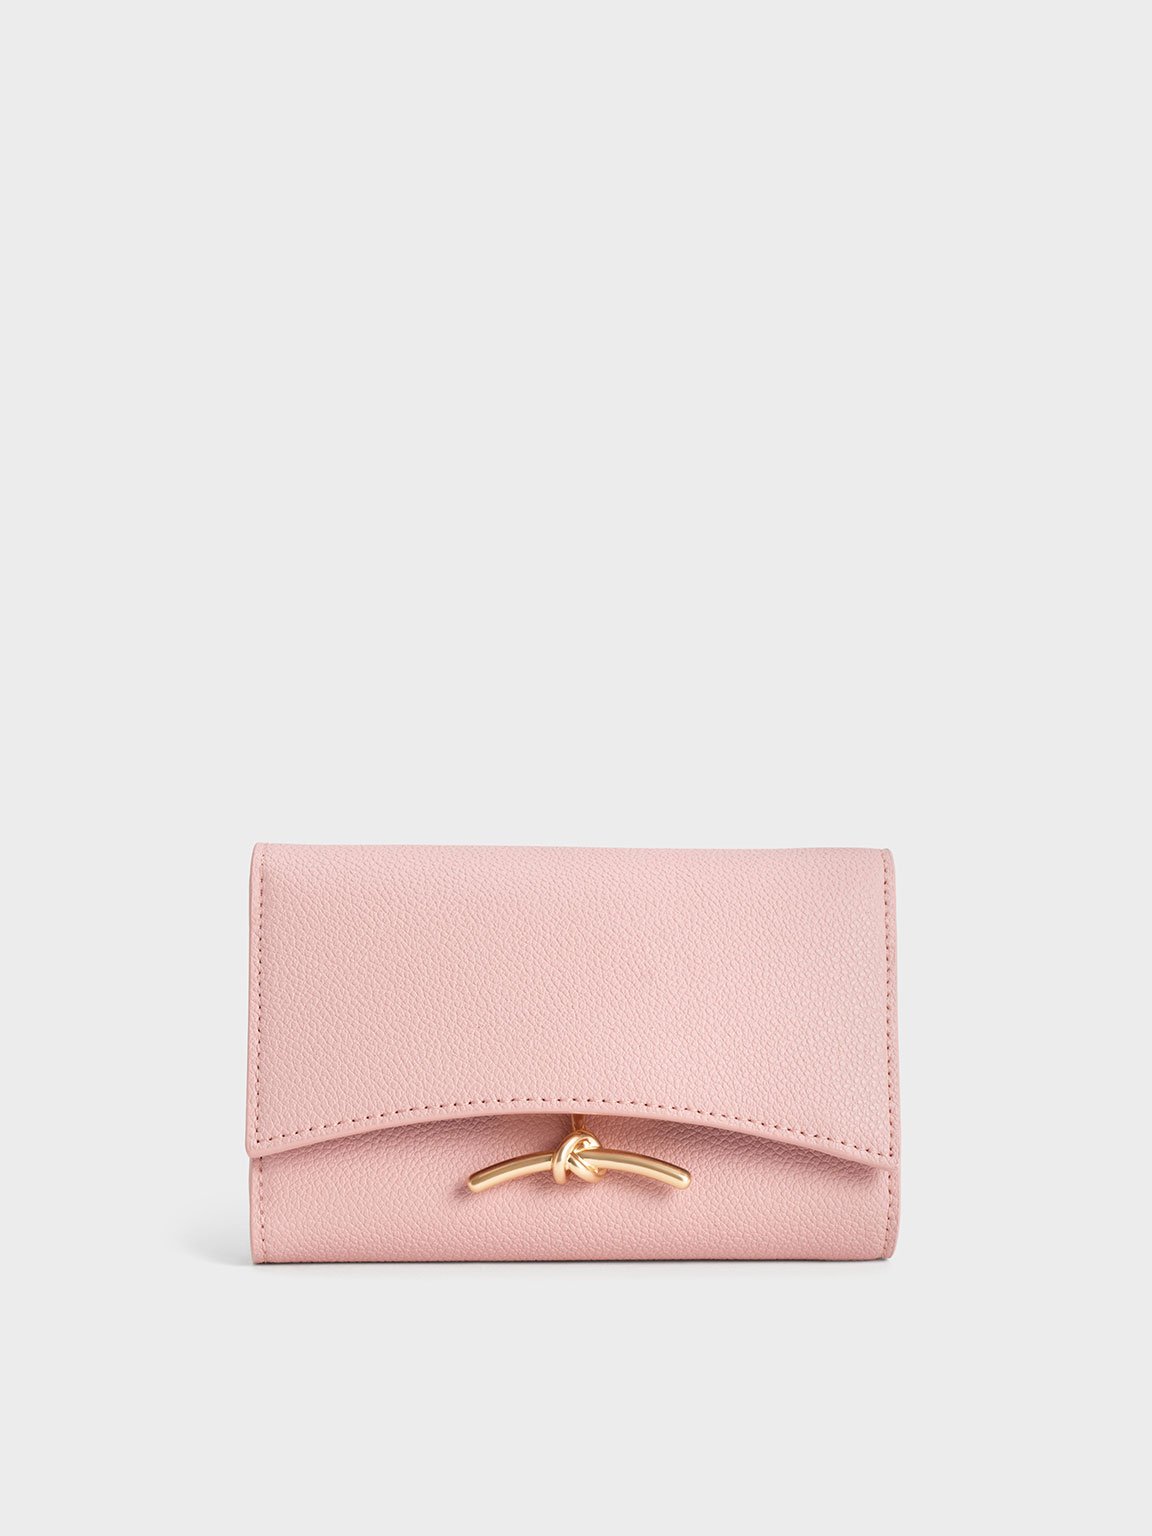 Prada Long Bow Wallet Pink Leather Auction